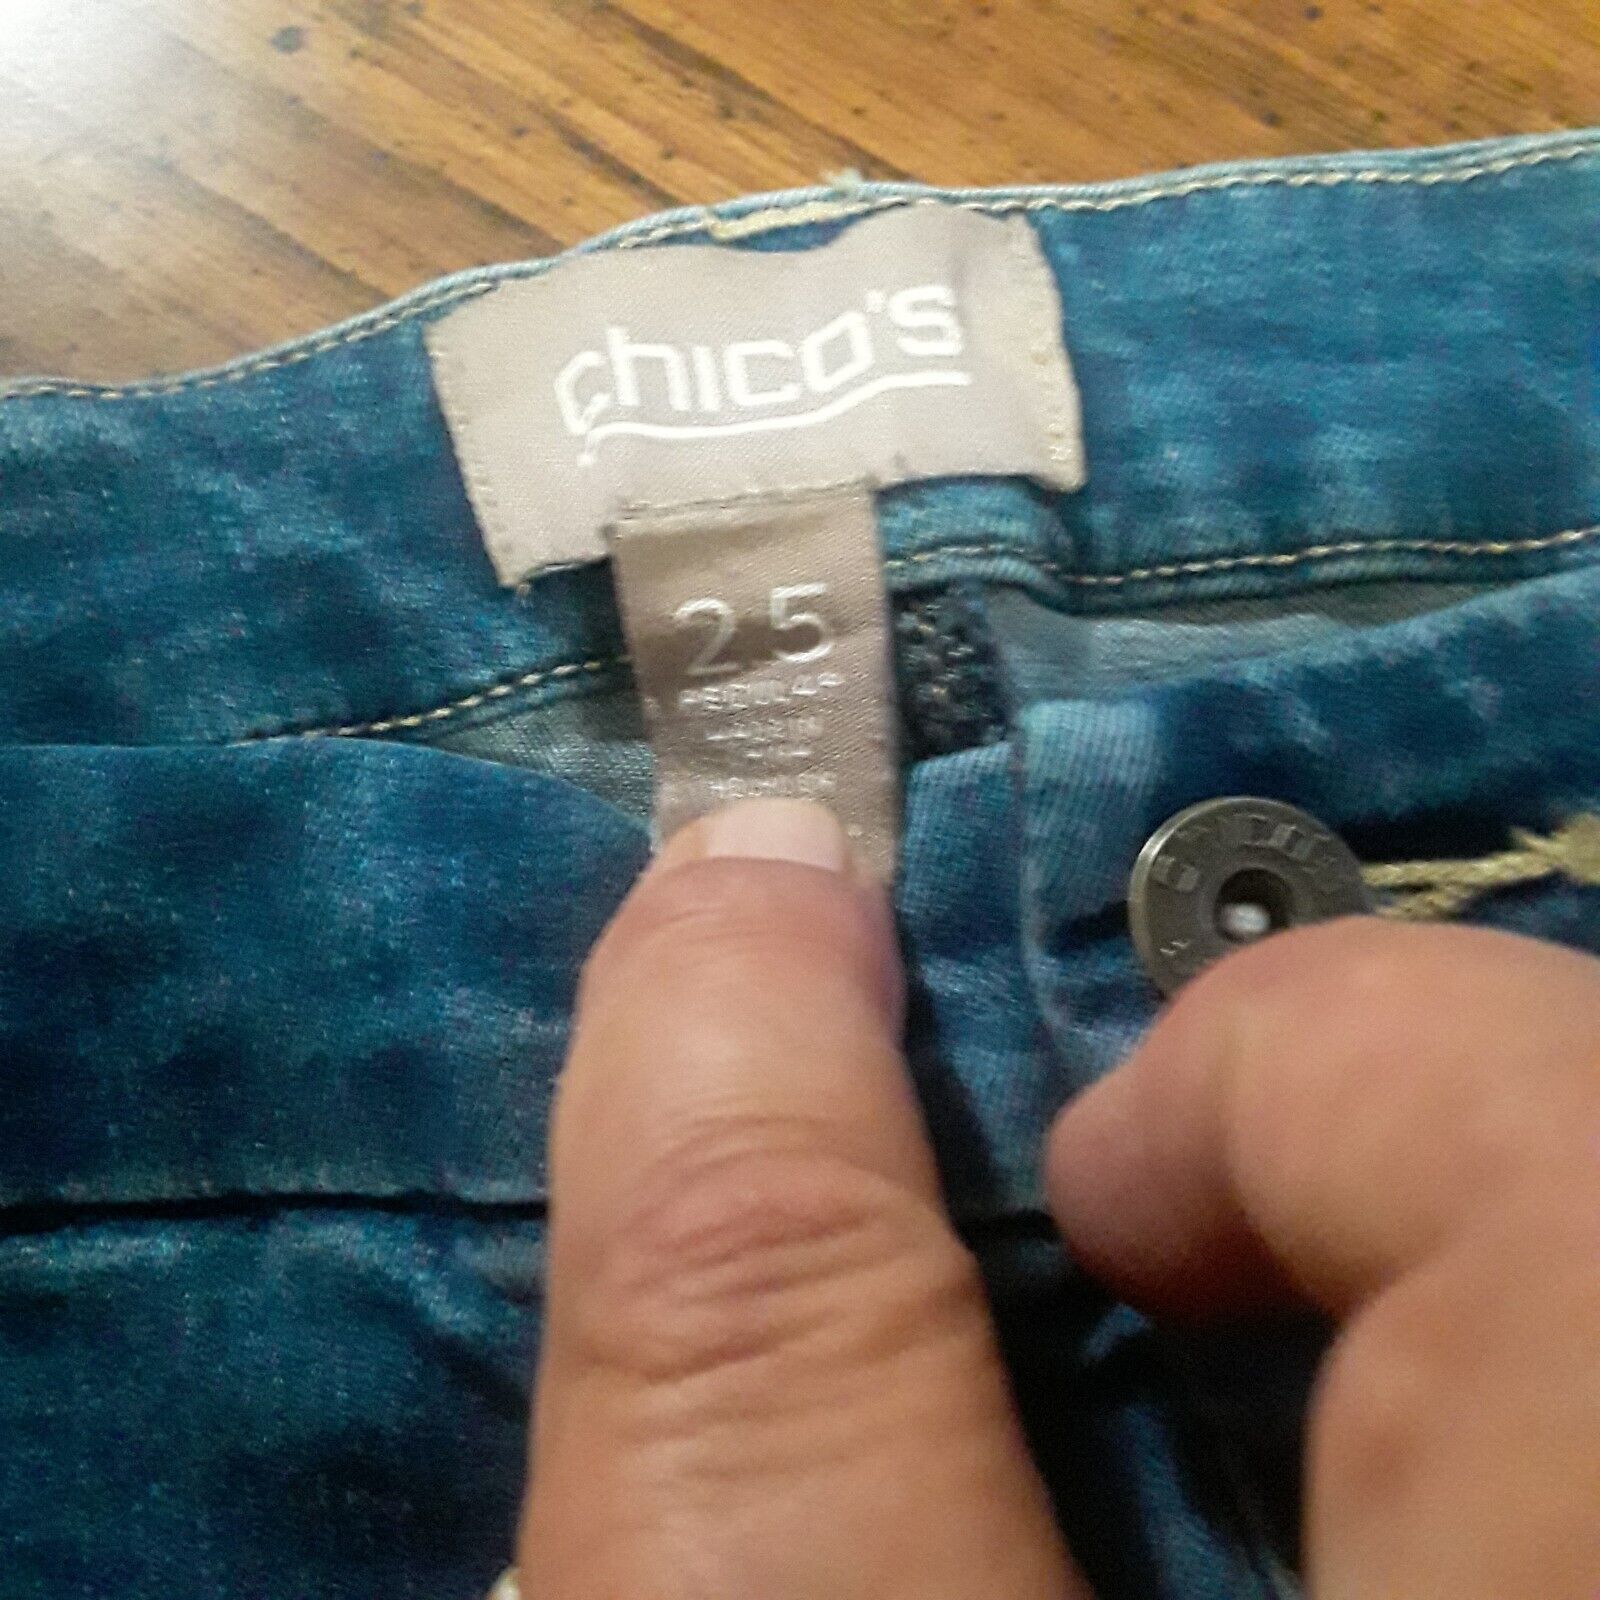 chicos jeans 2.5 embellished 28 Inseam Preowned - image 3